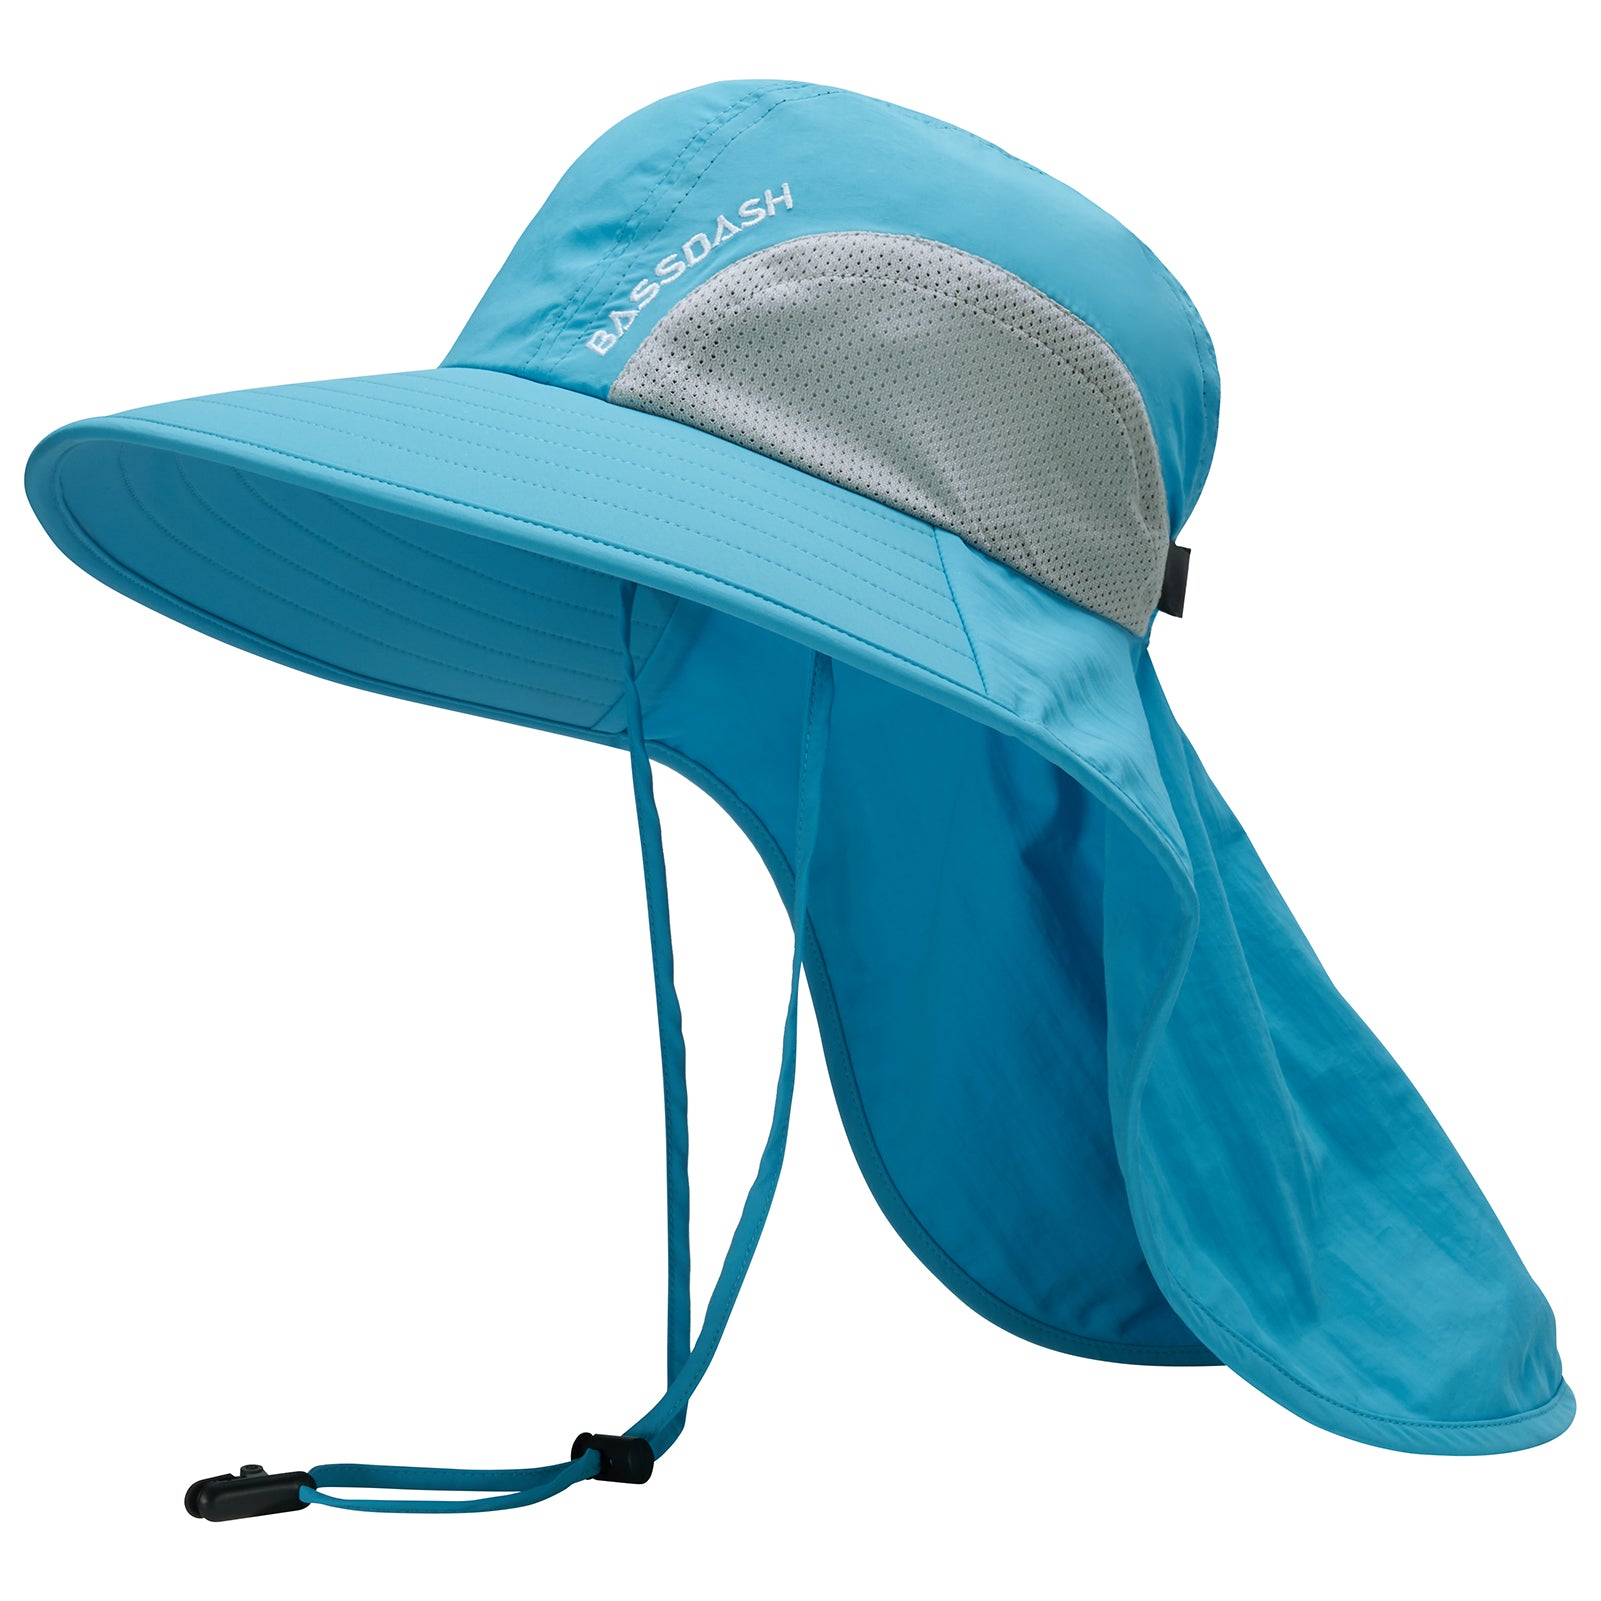 Unisex UPF 50+ Water Resistant Sun Hat with Neck Flap FH06, Light Blue